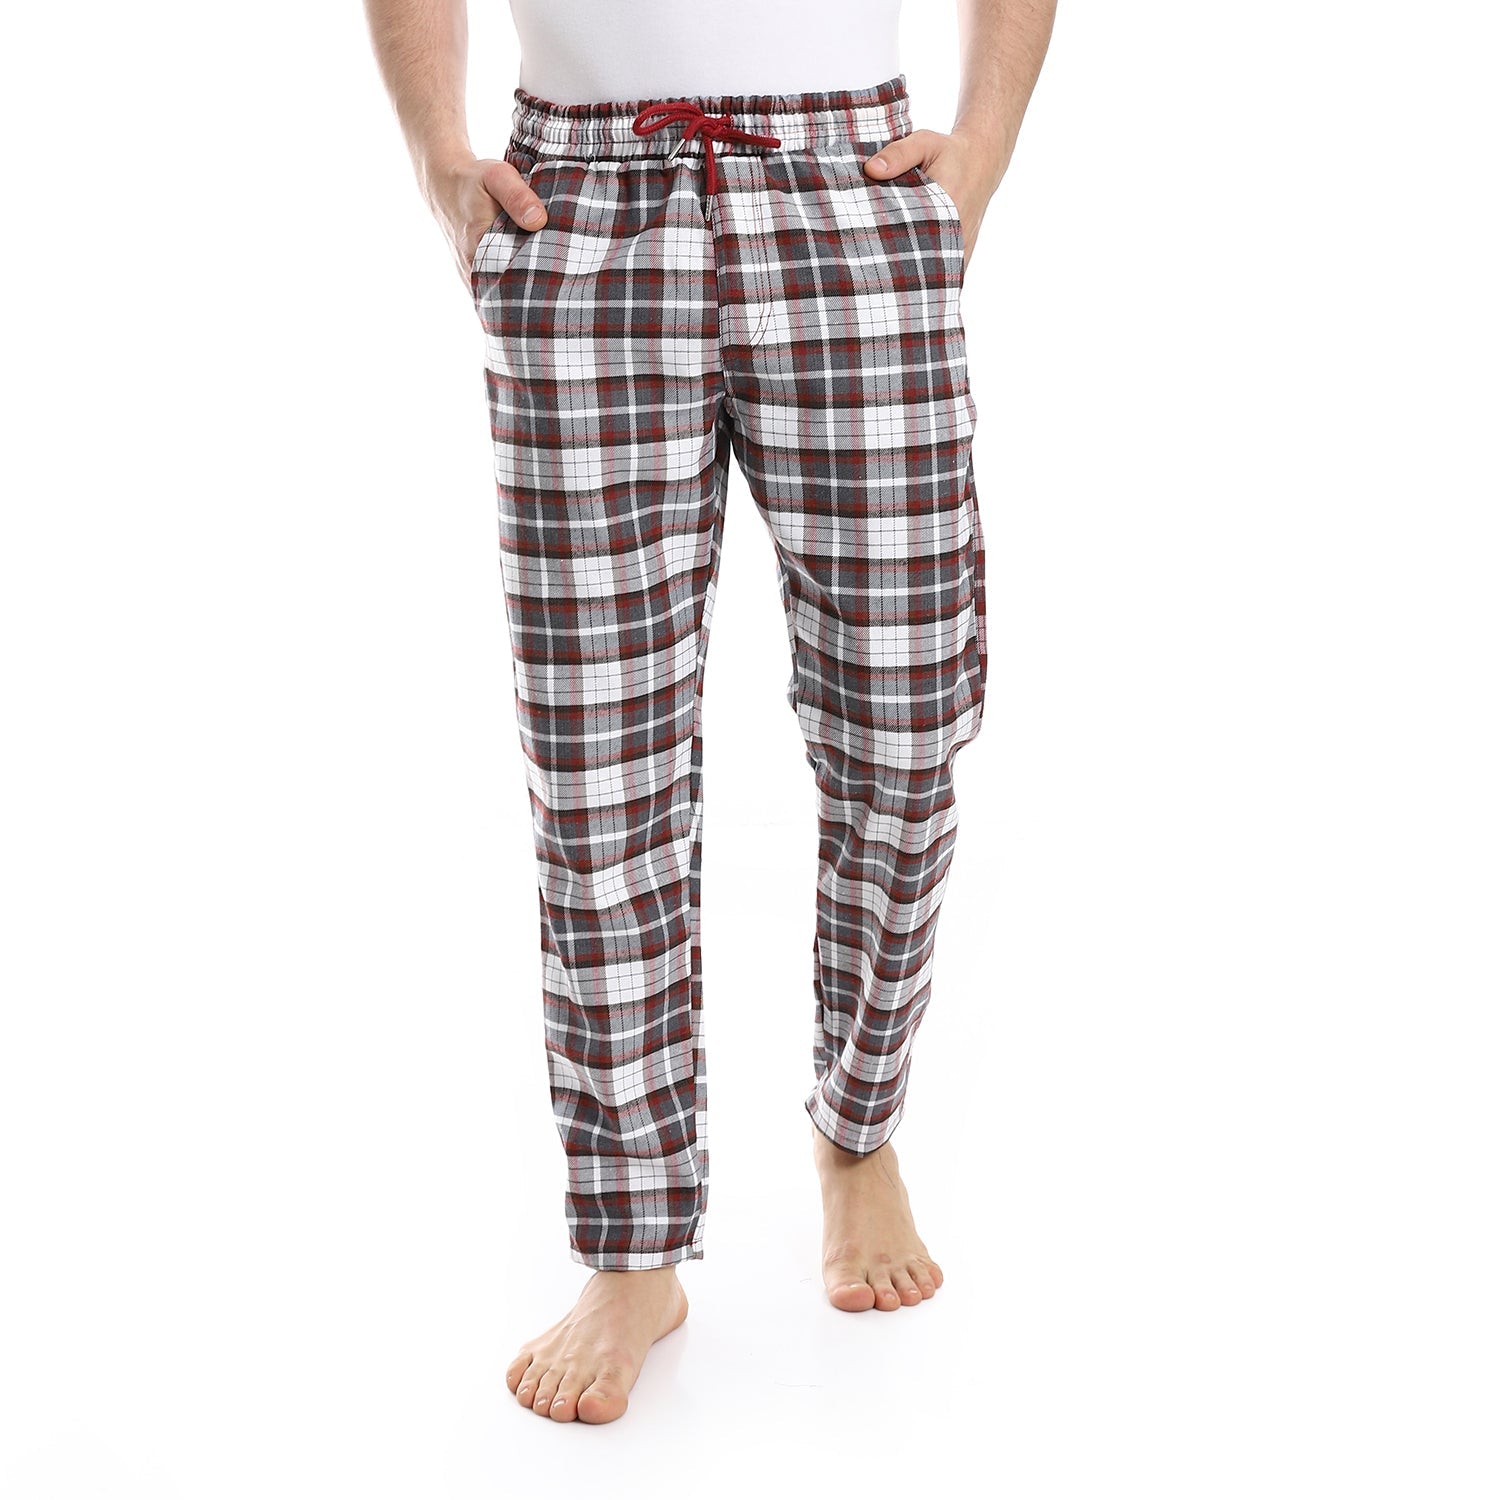 Men's red cotton summer check pants - Grey